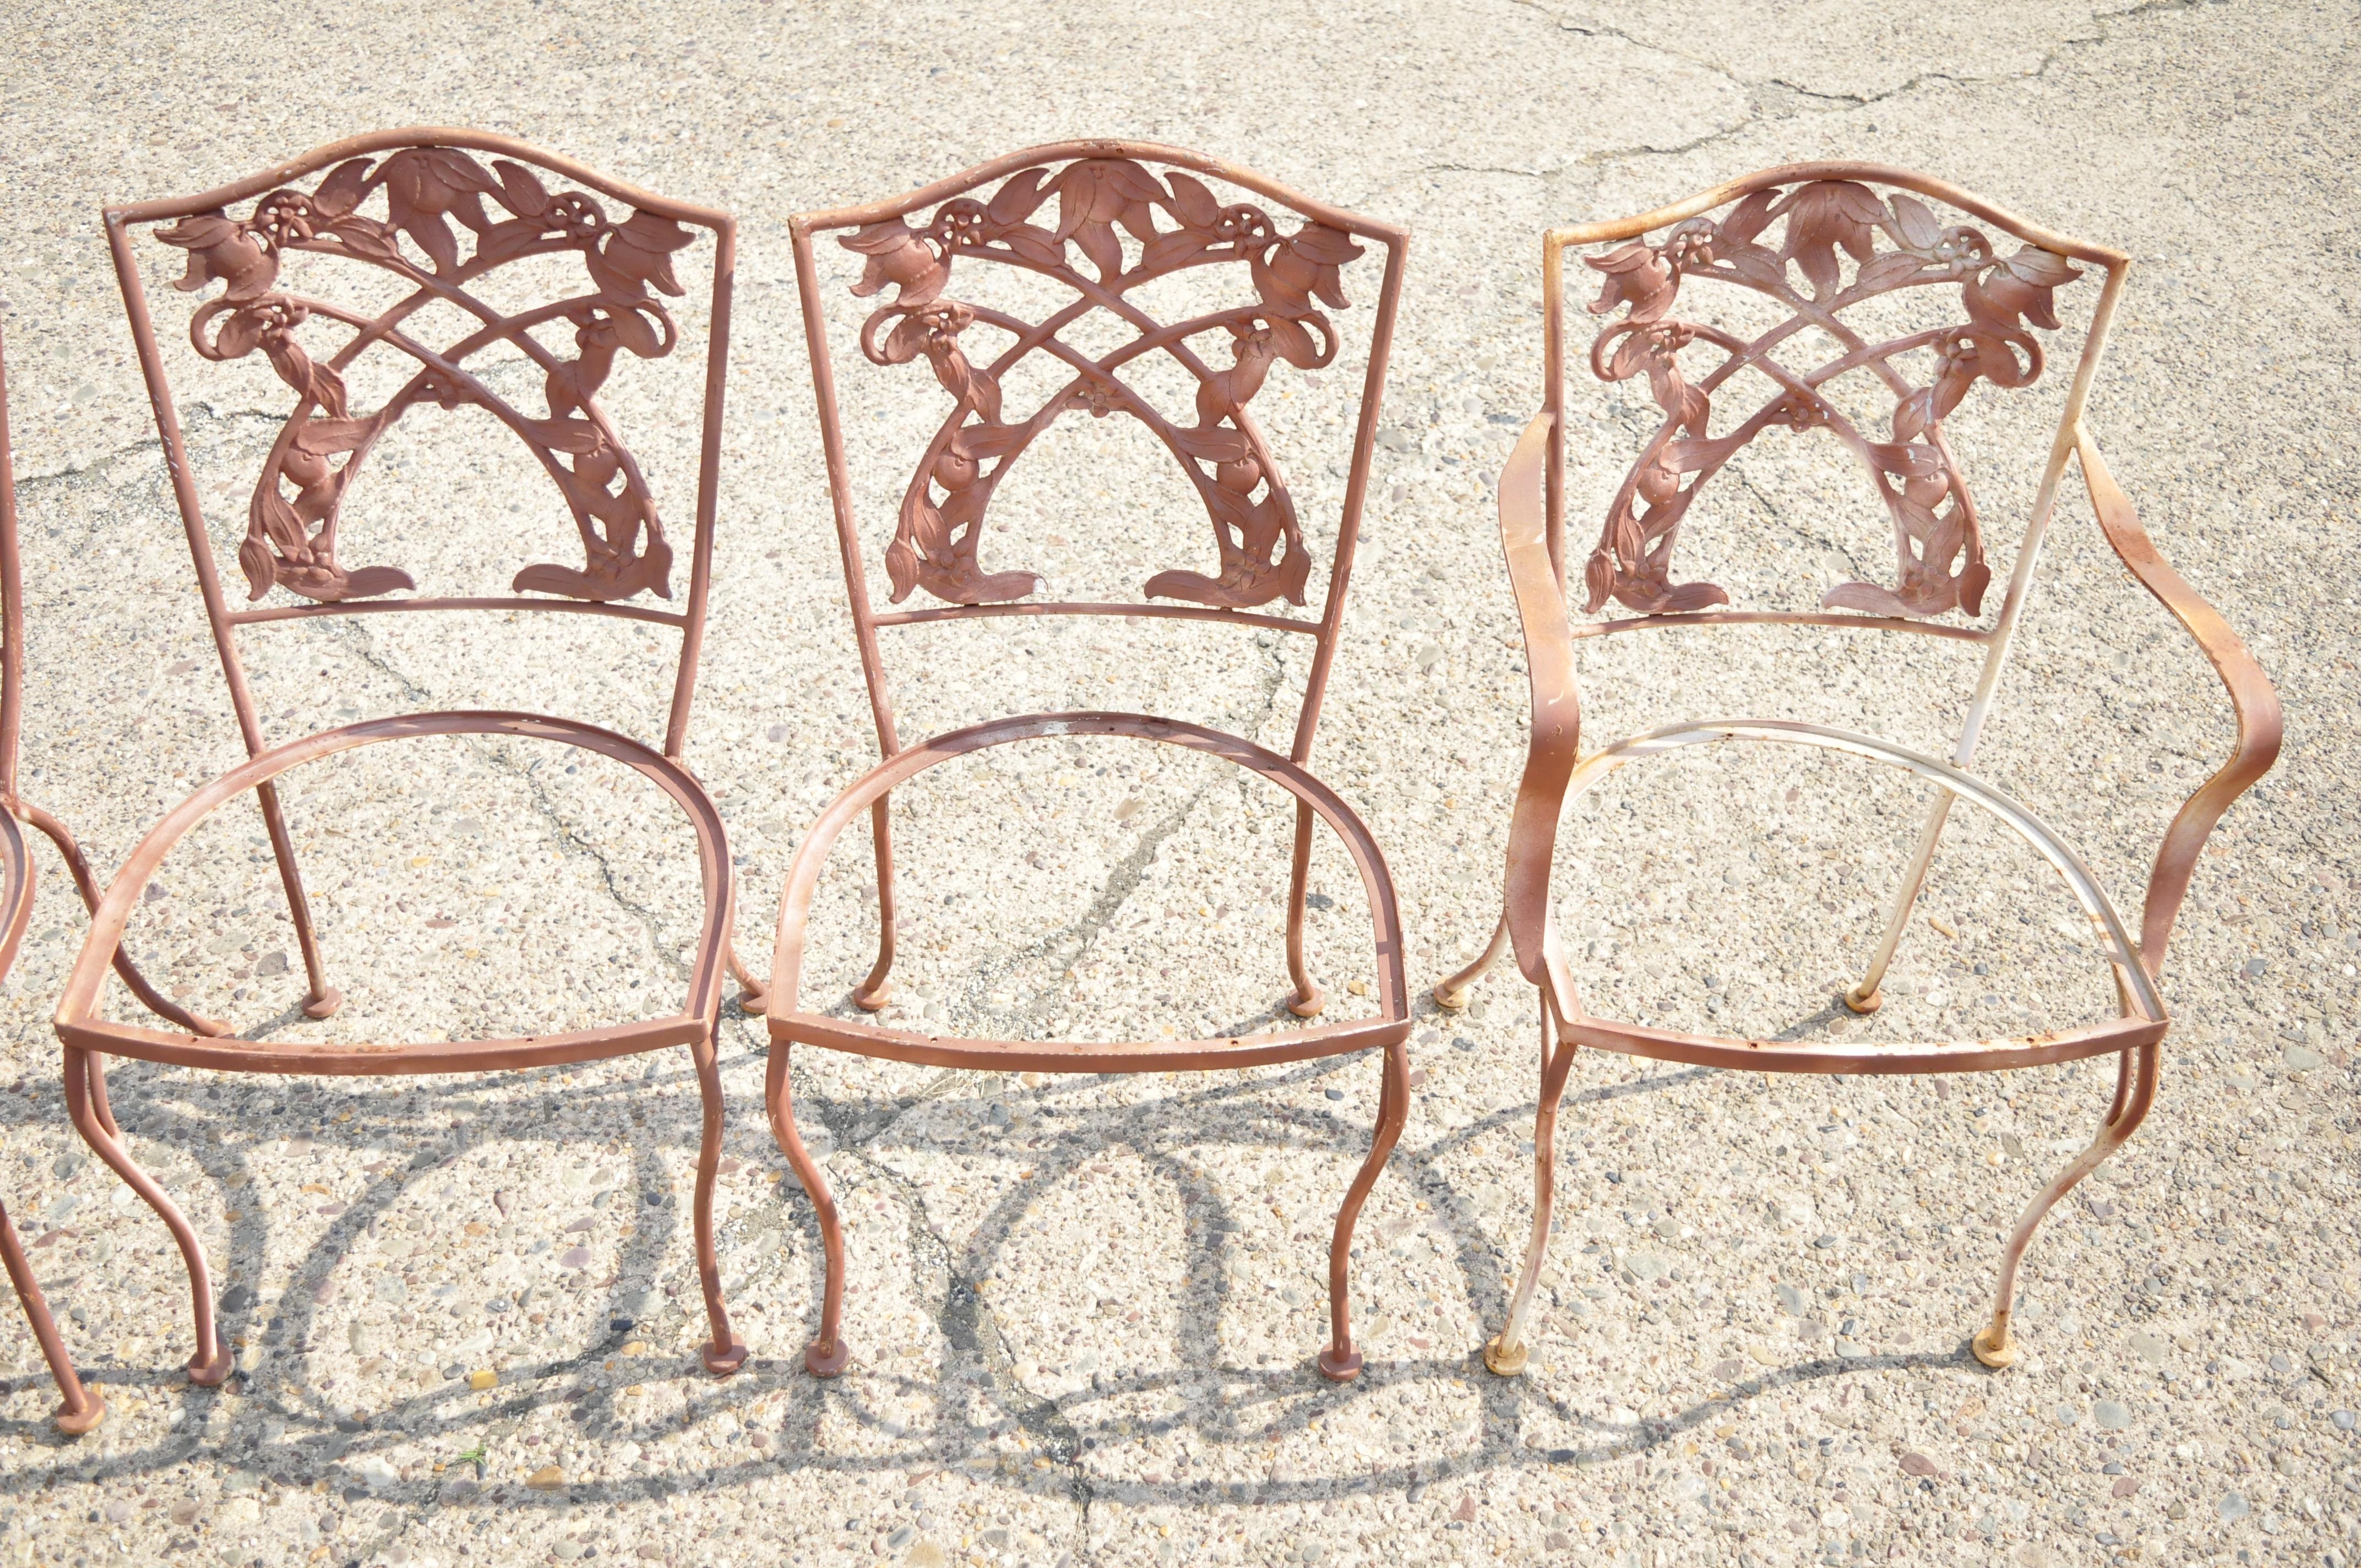 French Art Nouveau Vine Back Iron Outdoor Garden Dining Chairs, Set of 6 2